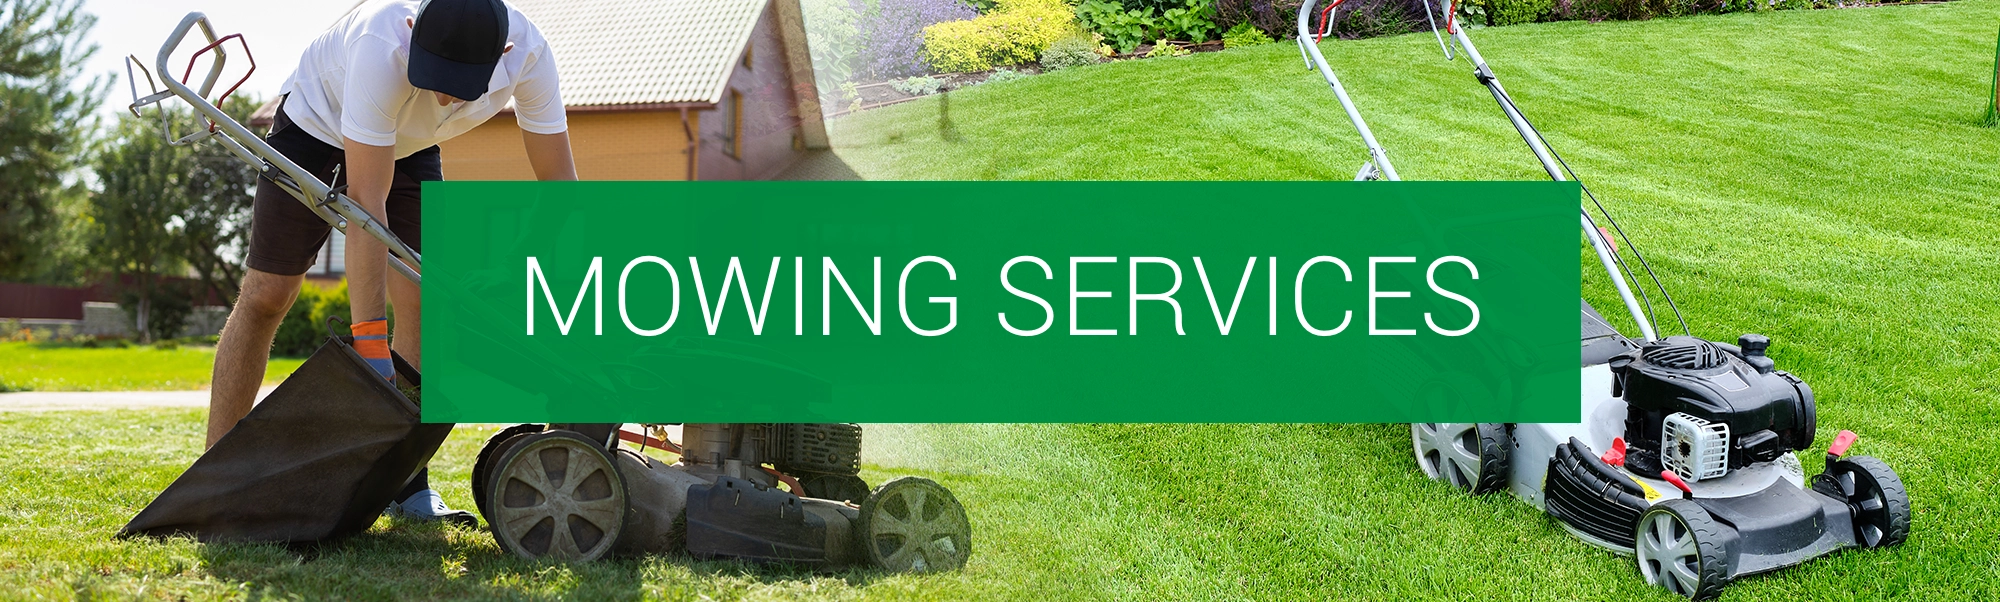 Lawn Care Services in Idaho - Mowing